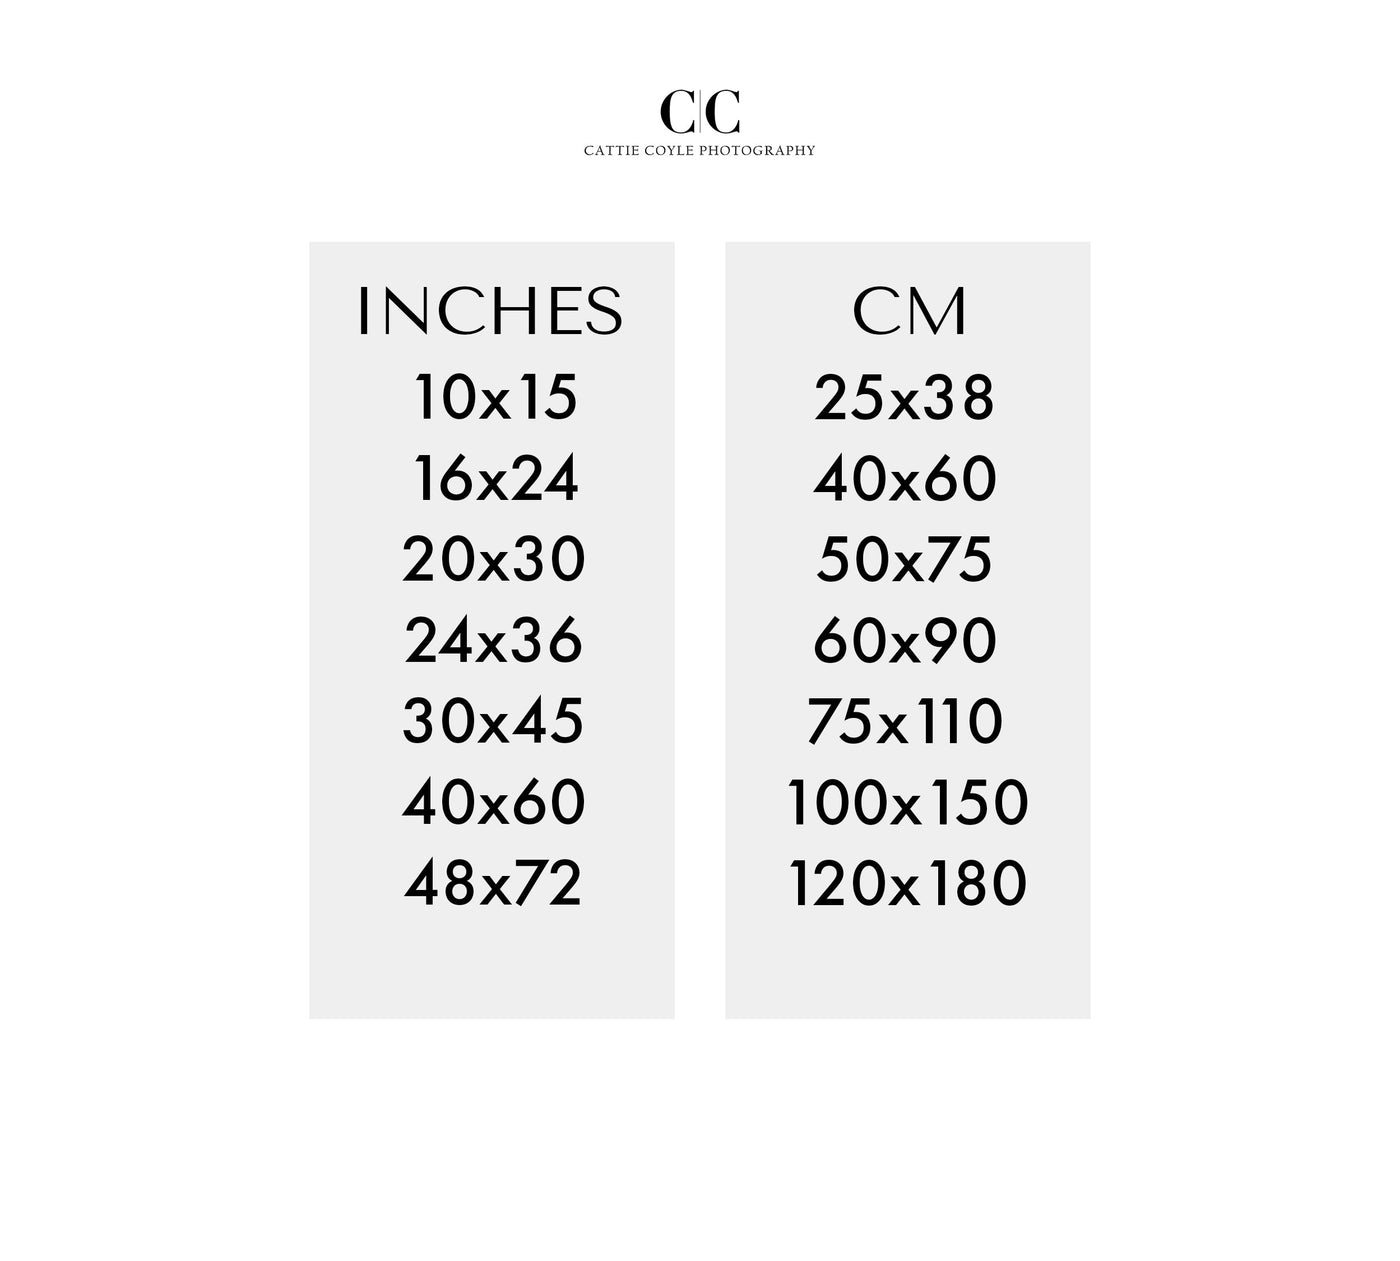 10x15 - 48x72 Inches to cm conversion chart Cattie Coyle Photography